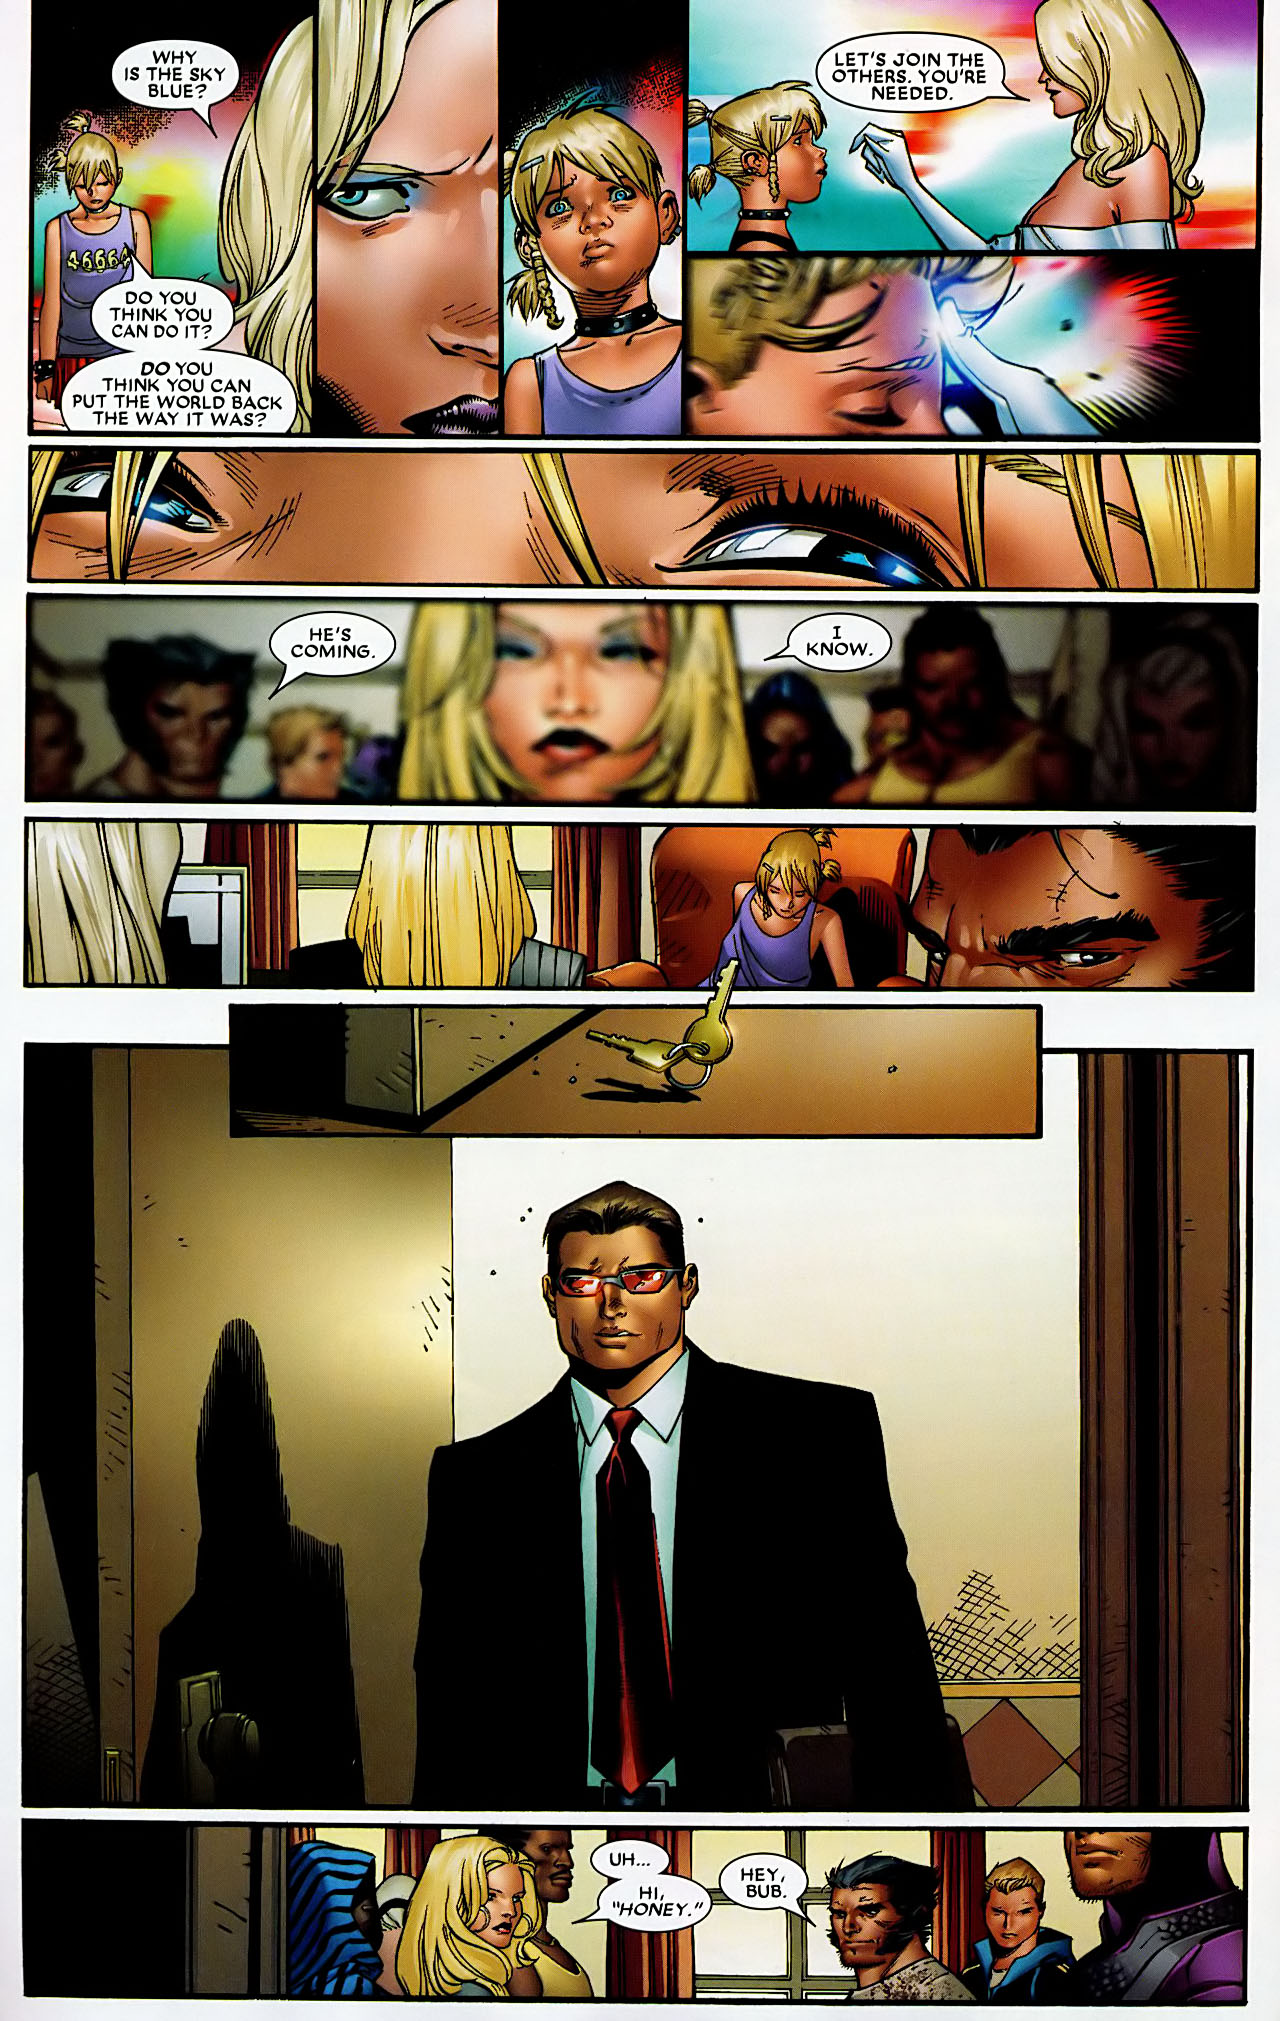 House of M 5 of 8